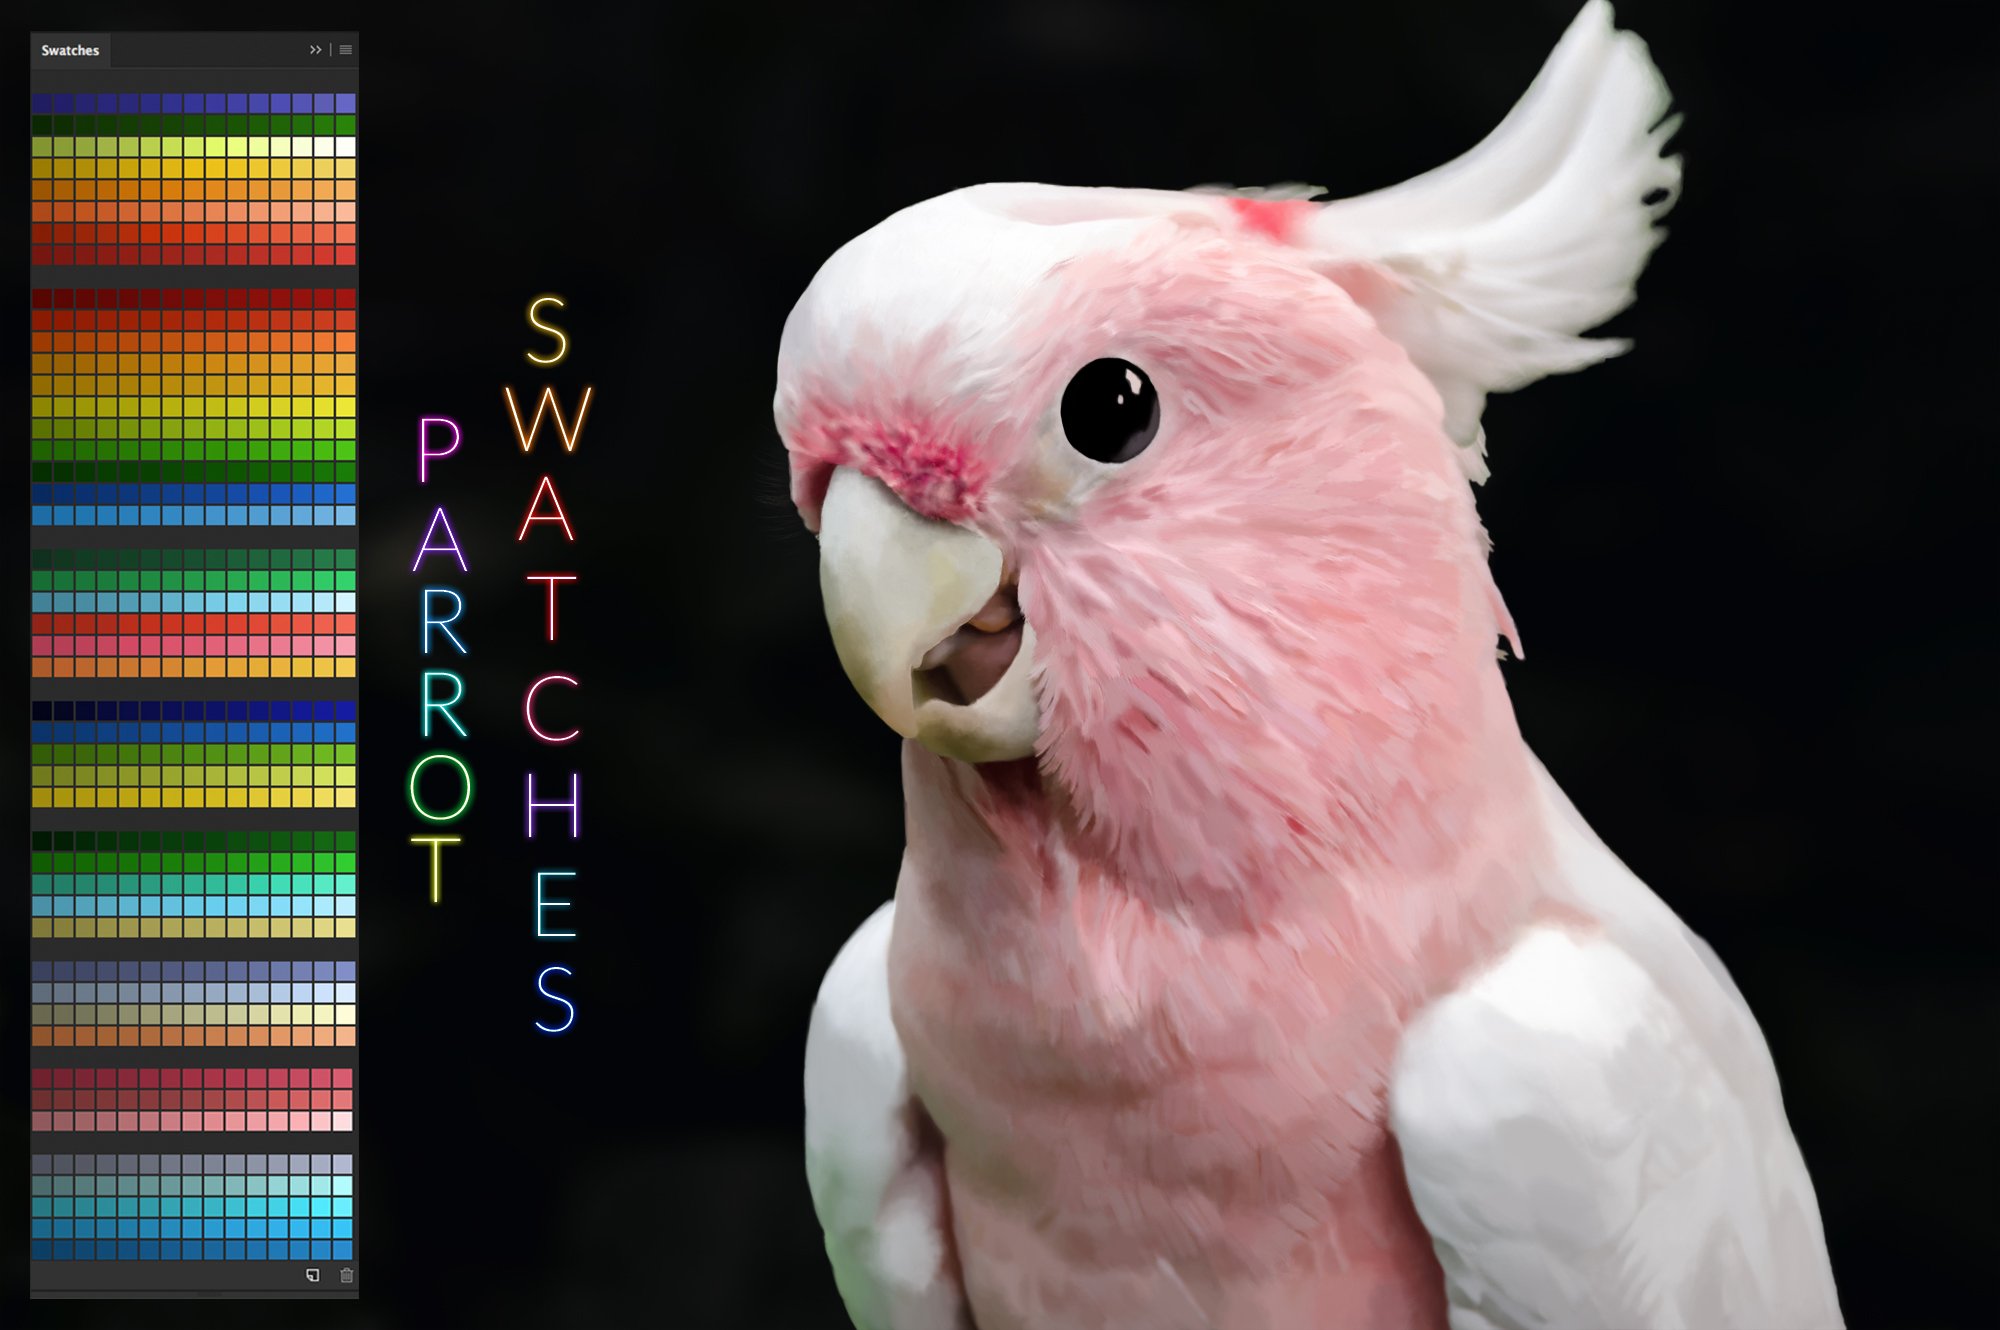 Parrot Swatchescover image.